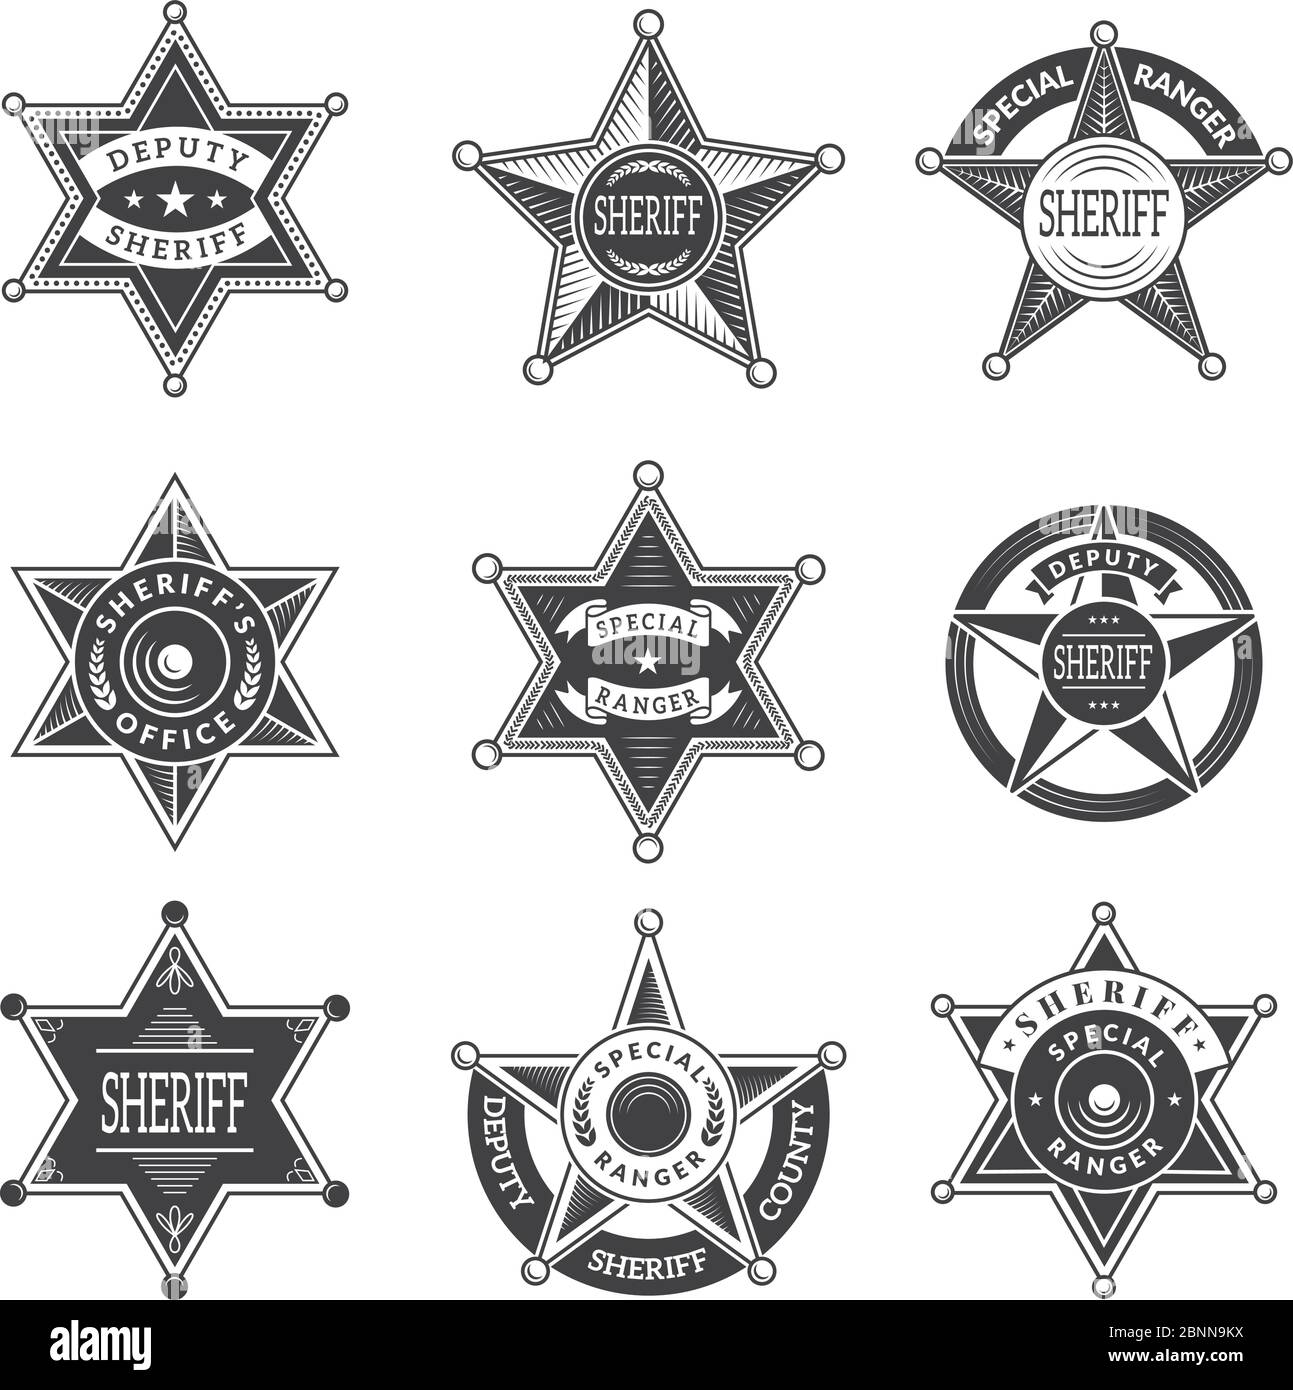 Sheriff stars badges. Western star texas and rangers shields or logos vintage vector pictures Stock Vector